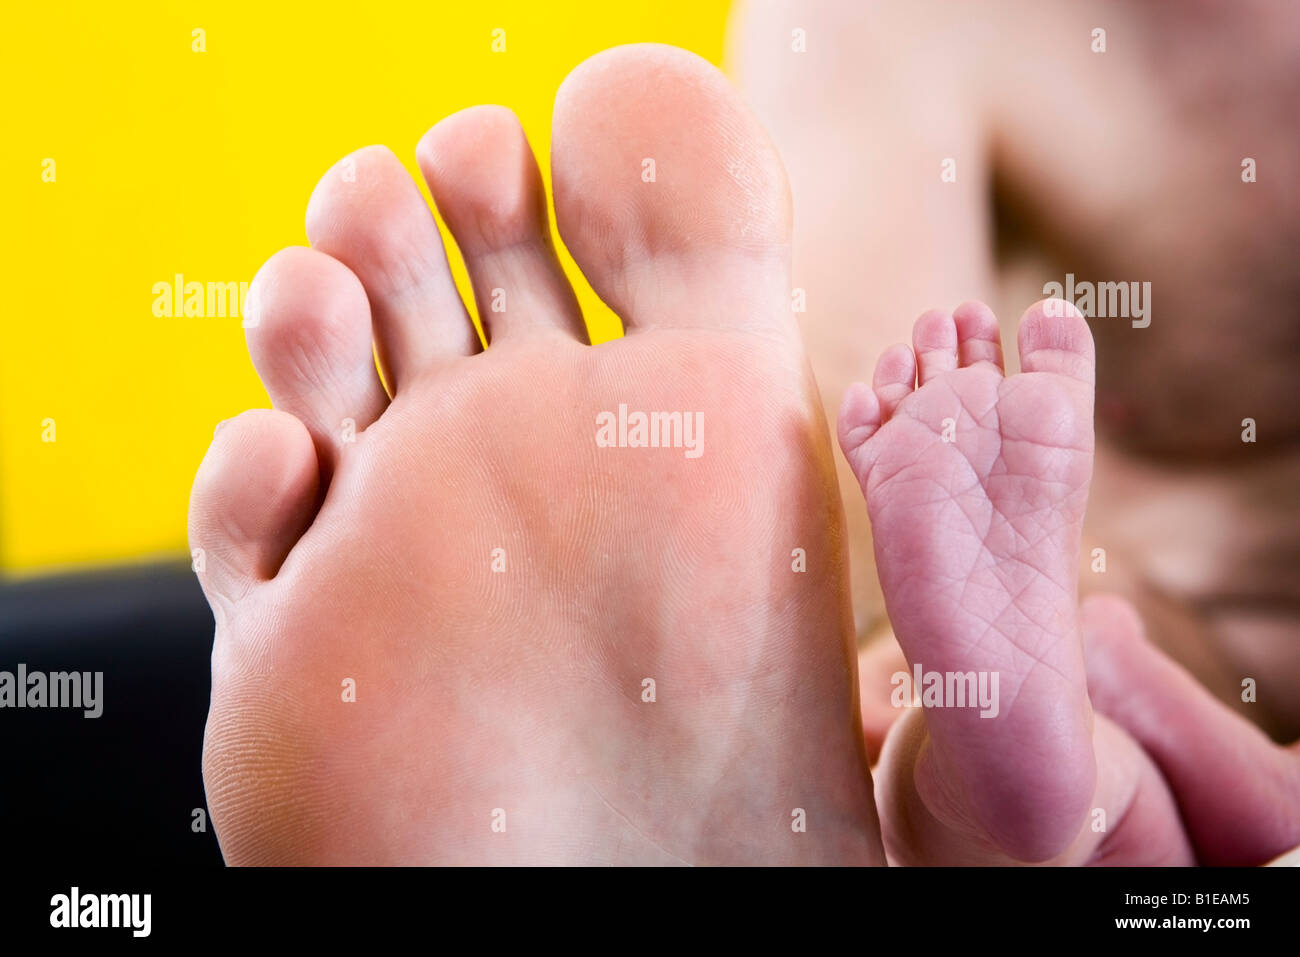 Newborn infant's foot placed in front 